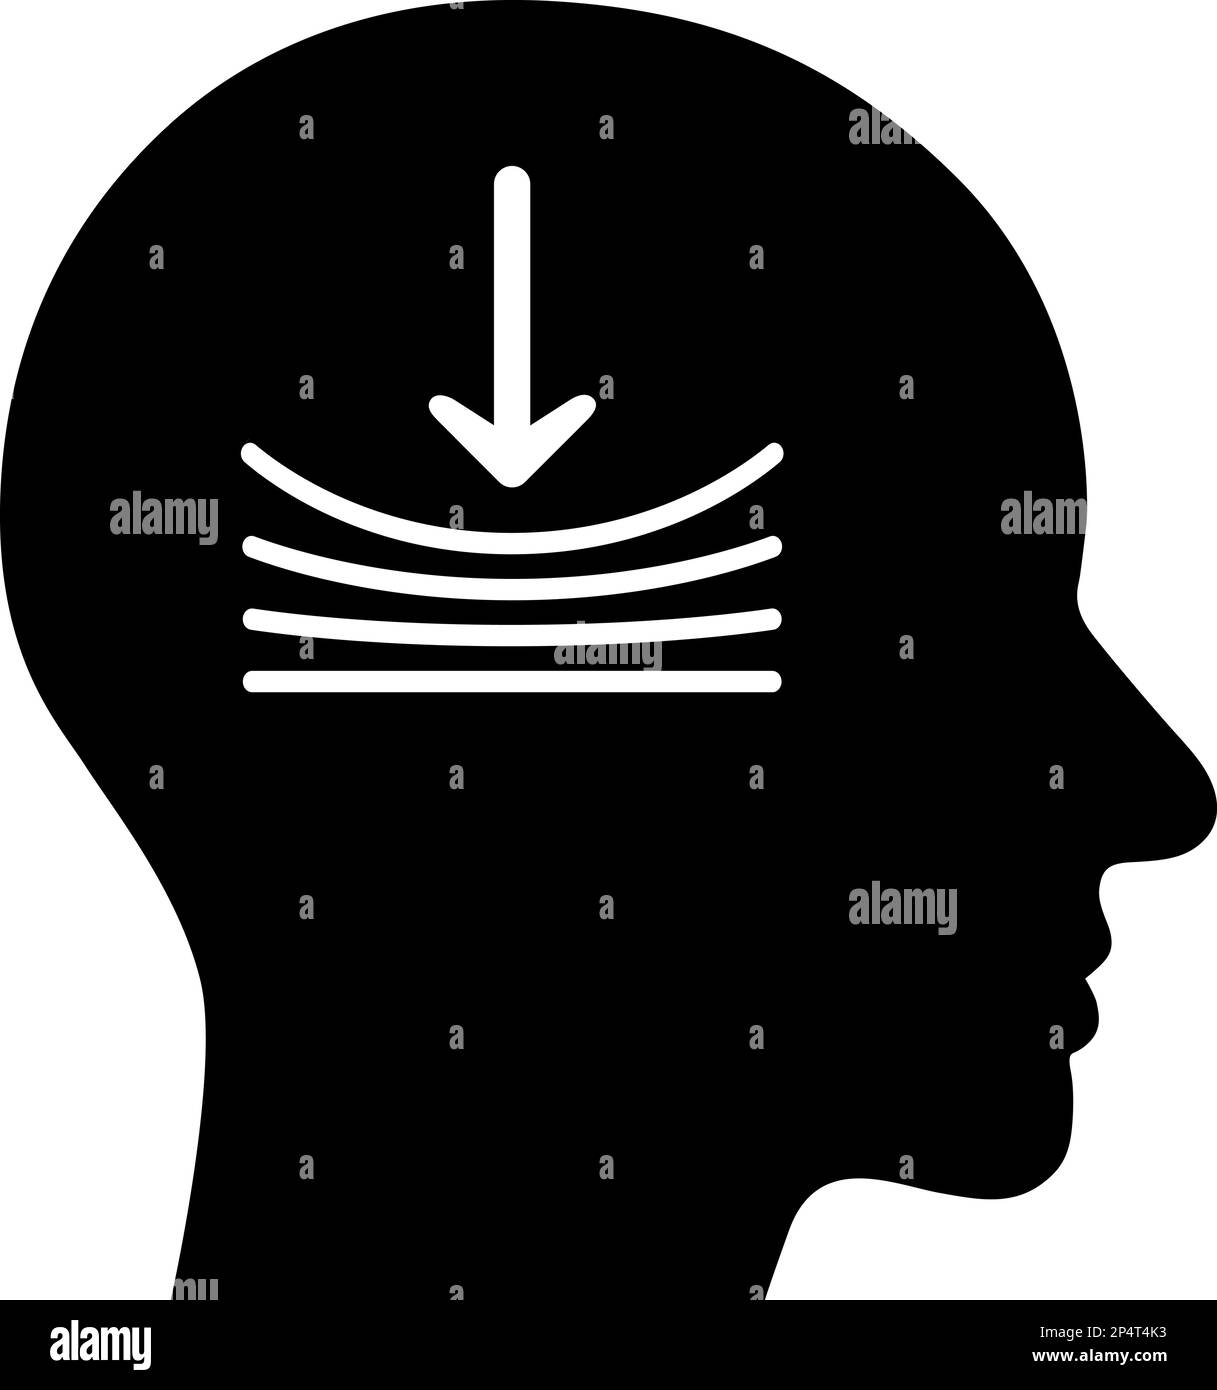 Flat icon in the human head symbolizing pressure as a concept of personal resilience Stock Vector